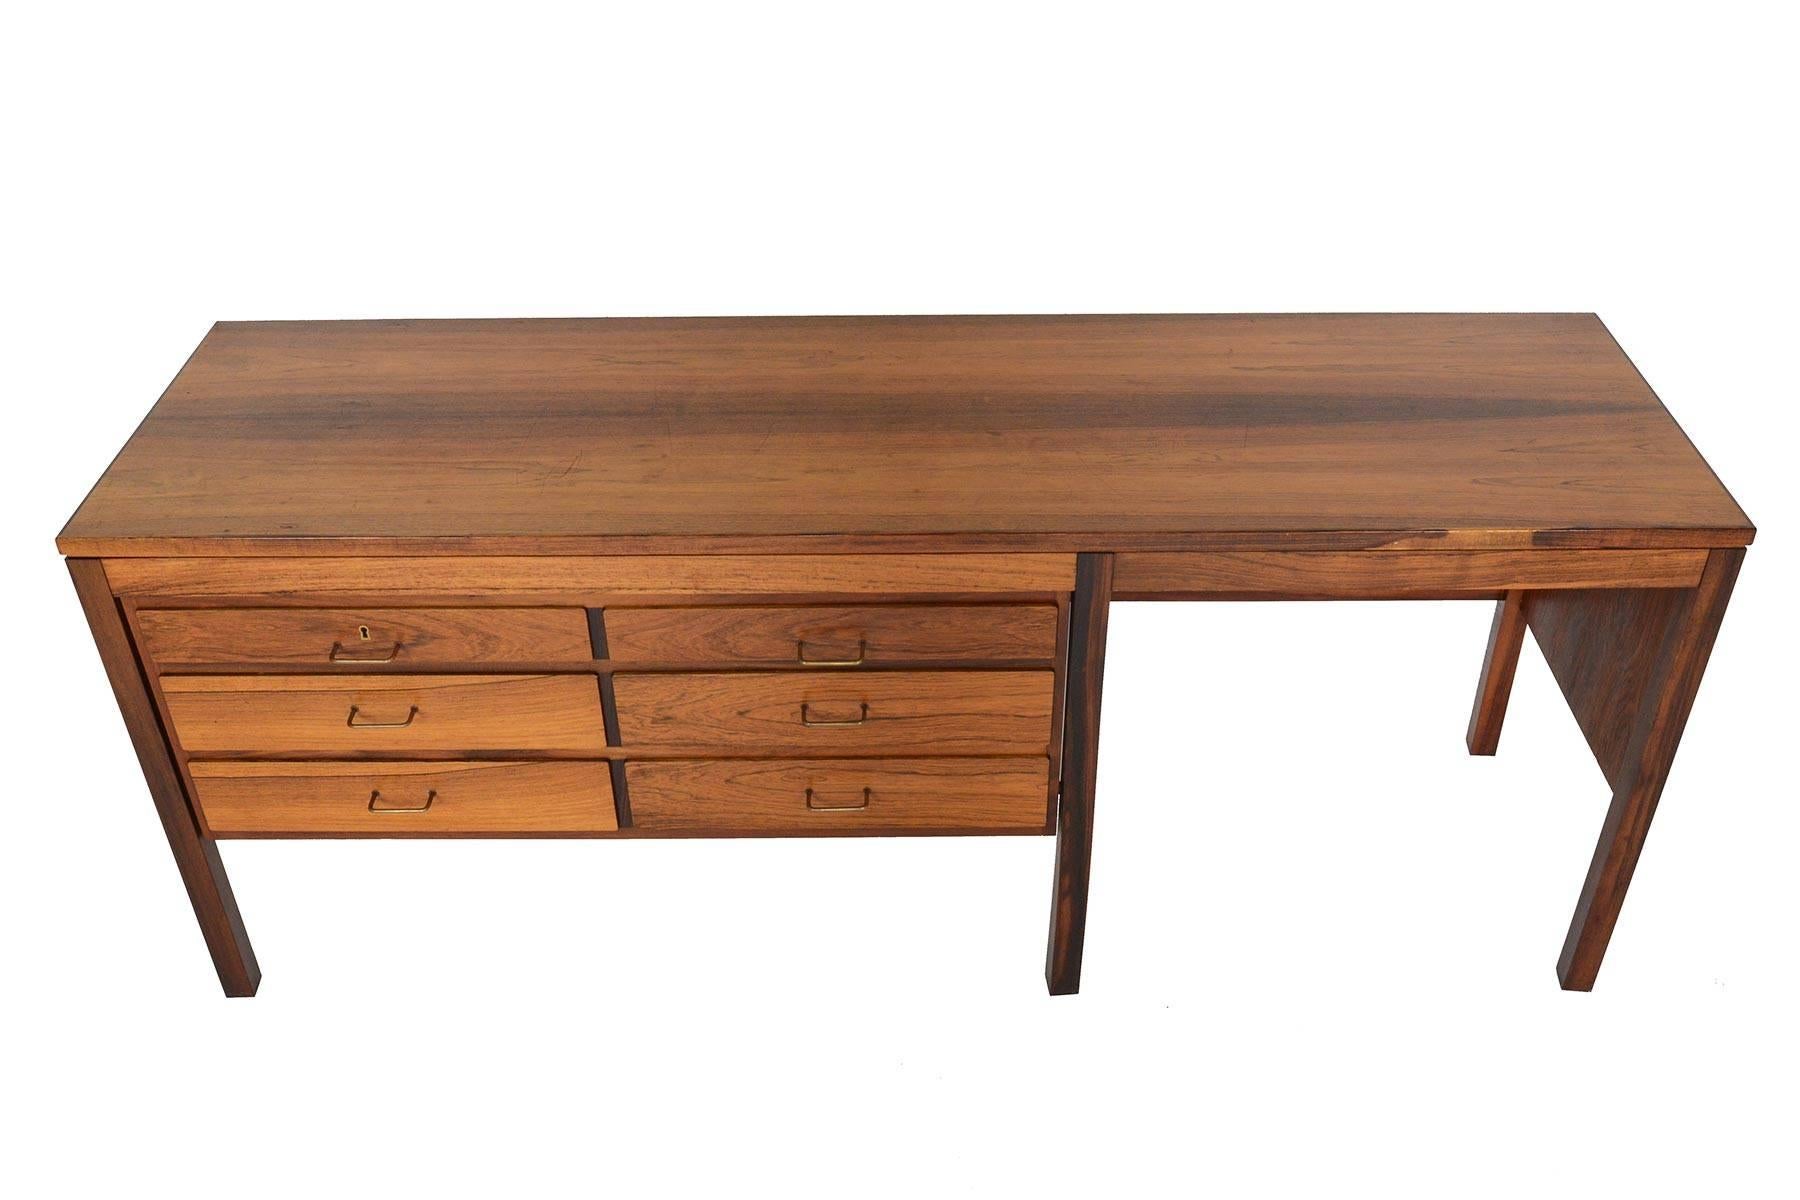 This unusually configured Danish modern dresser vanity is crafted in Brazilian rosewood and provides six large drawers for storage. Each drawer is adorned with original brass pull. An open work surface with wide kneehole sits on the right of this